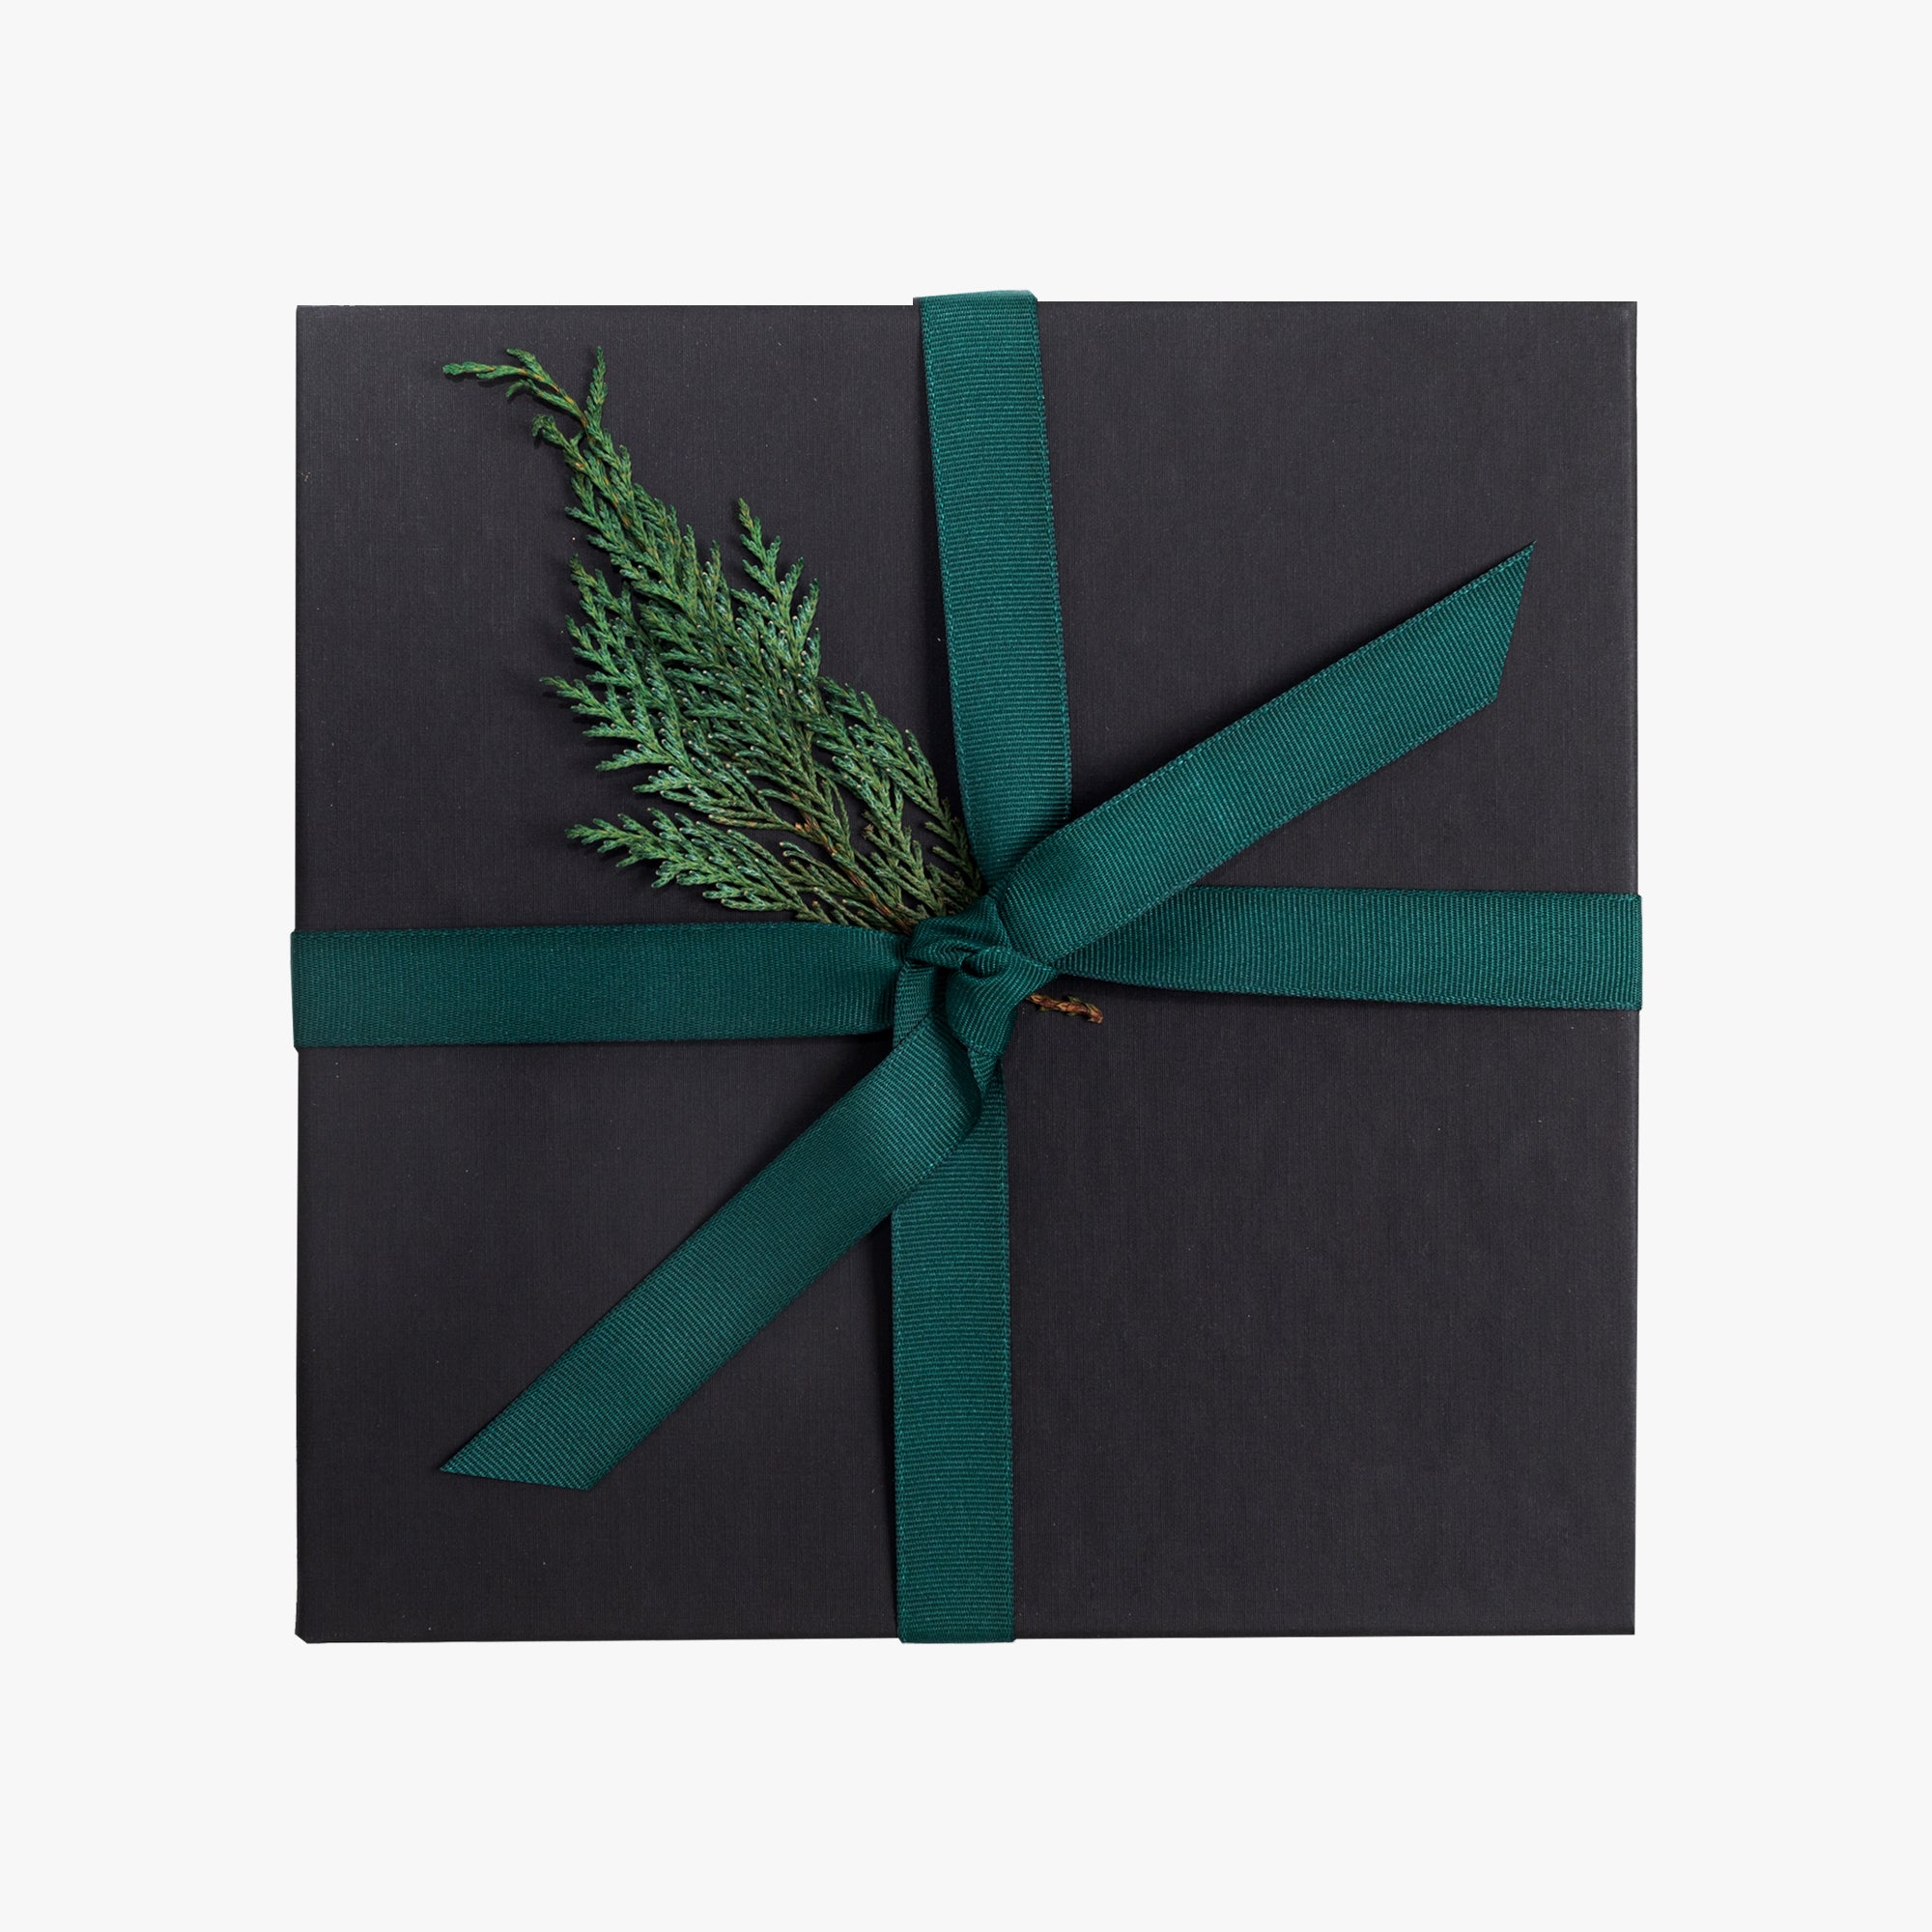 Cozy Holiday Corporate Gift Box